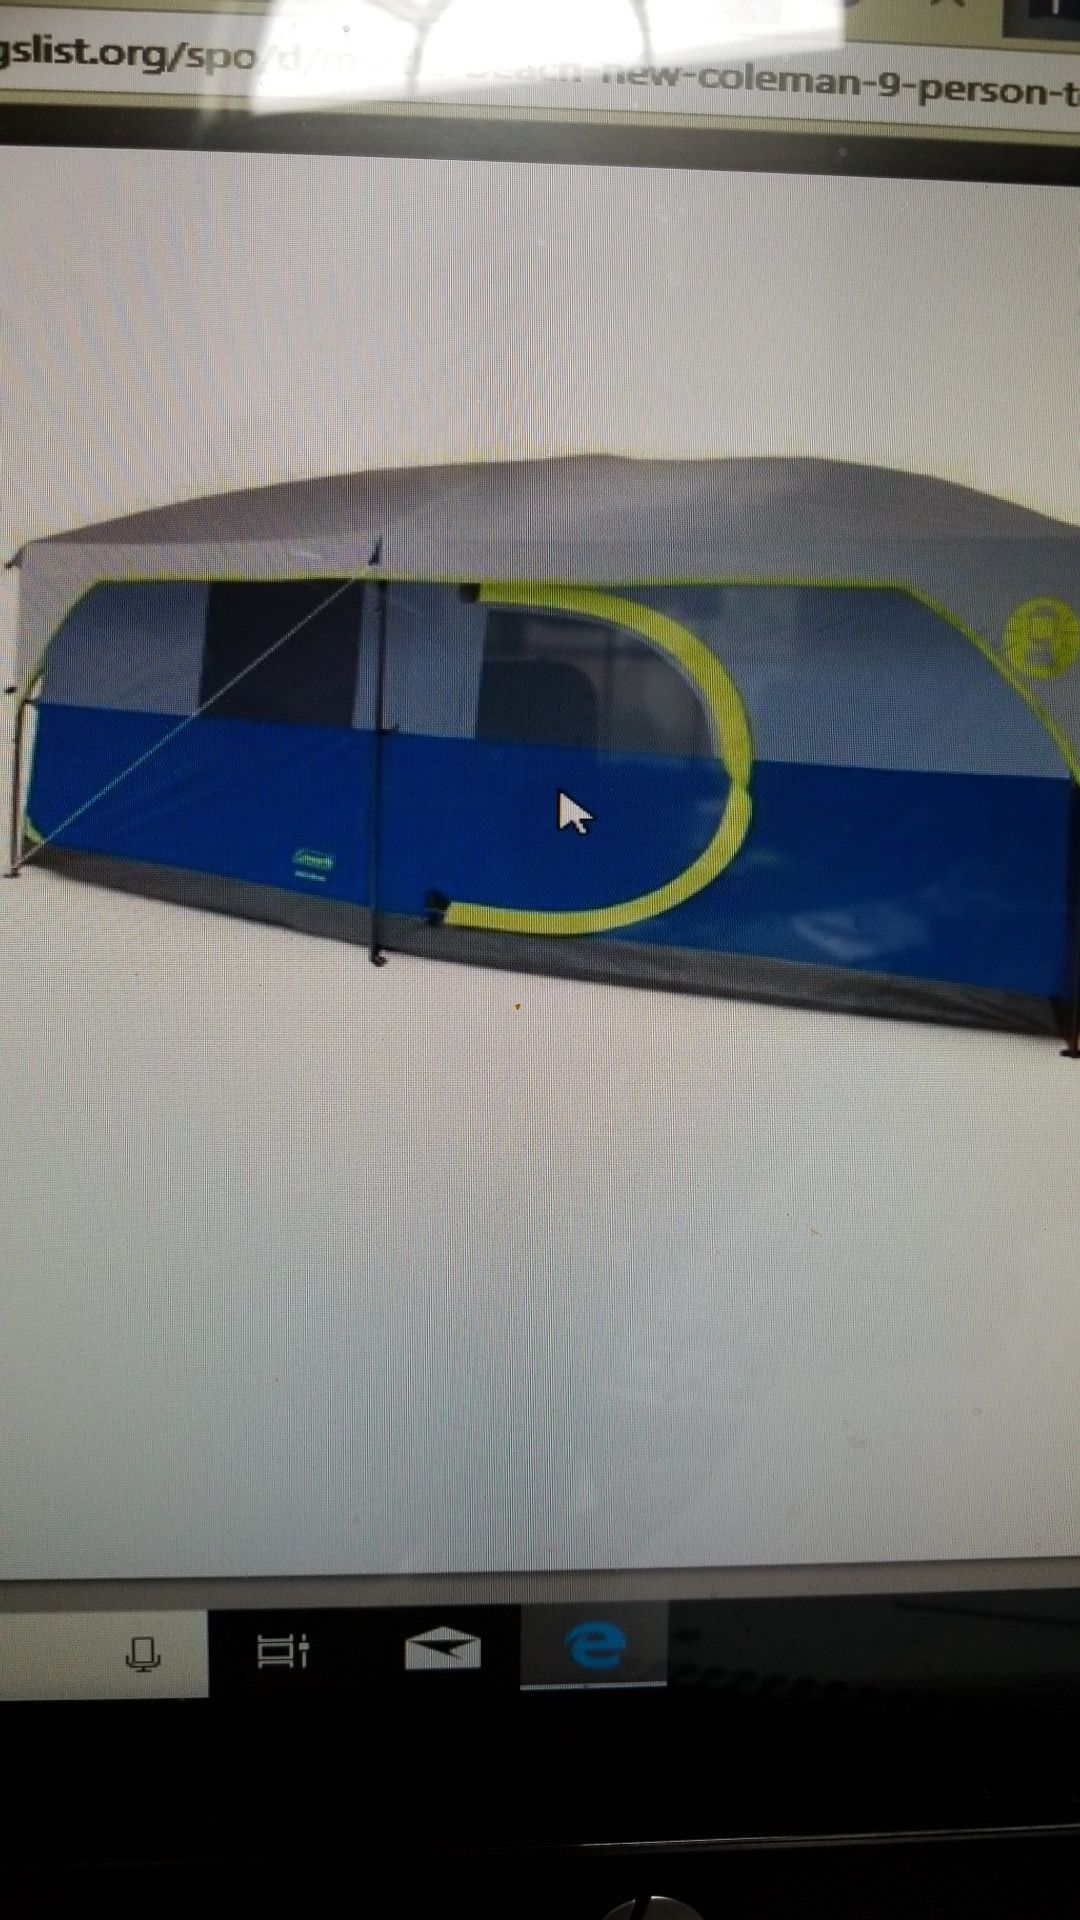 New Coleman 9 person tent